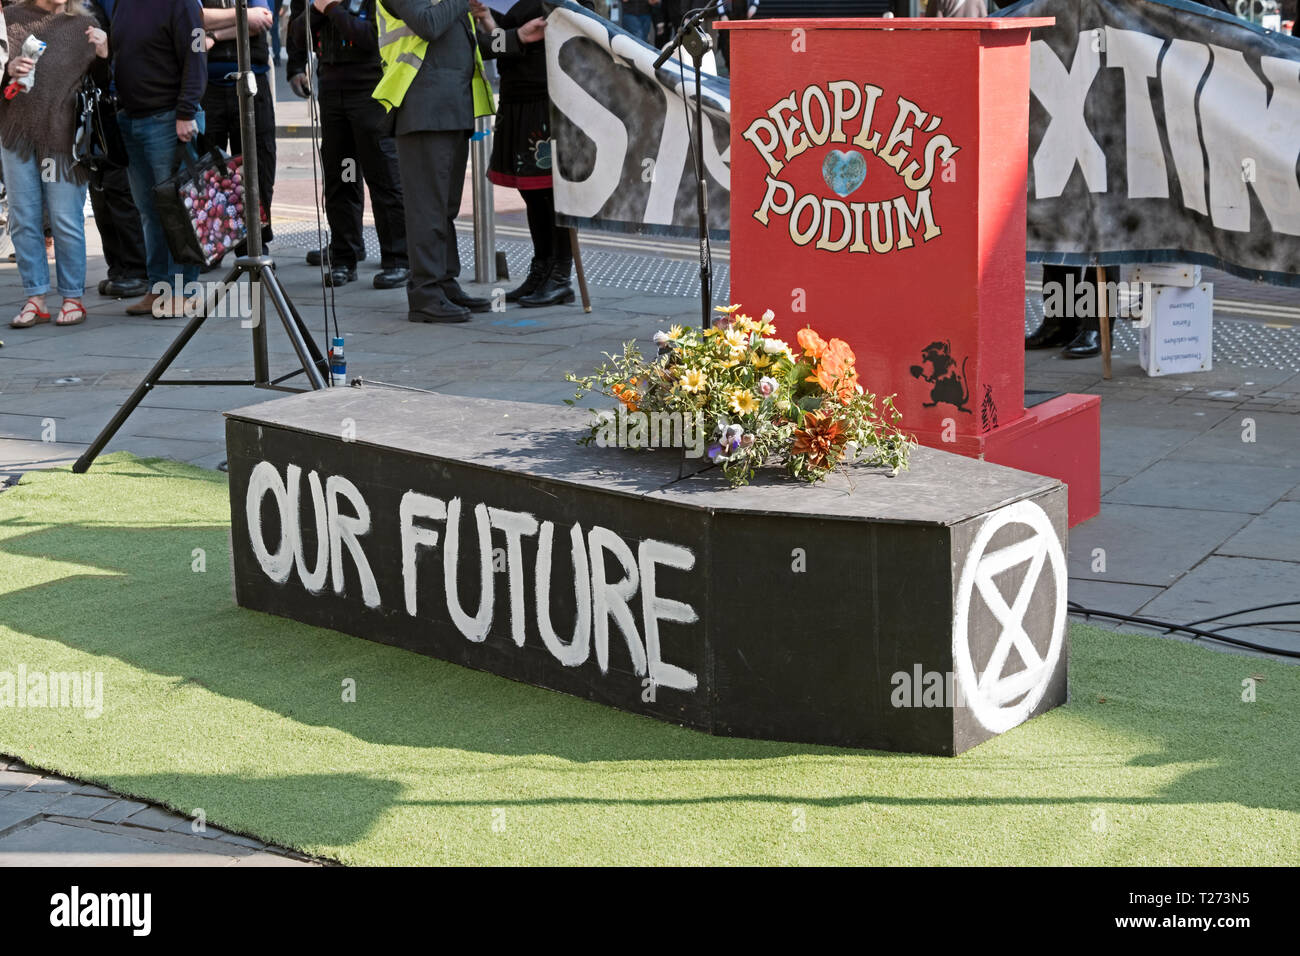 Weston-super-Mare, UK. 30th March, 2019. Protestors against climate change take part in a mock funeral. The demonstration was organised by Extinction Rebellion Weston-super-Mare. Keith Ramsey/Alamy Live News Stock Photo